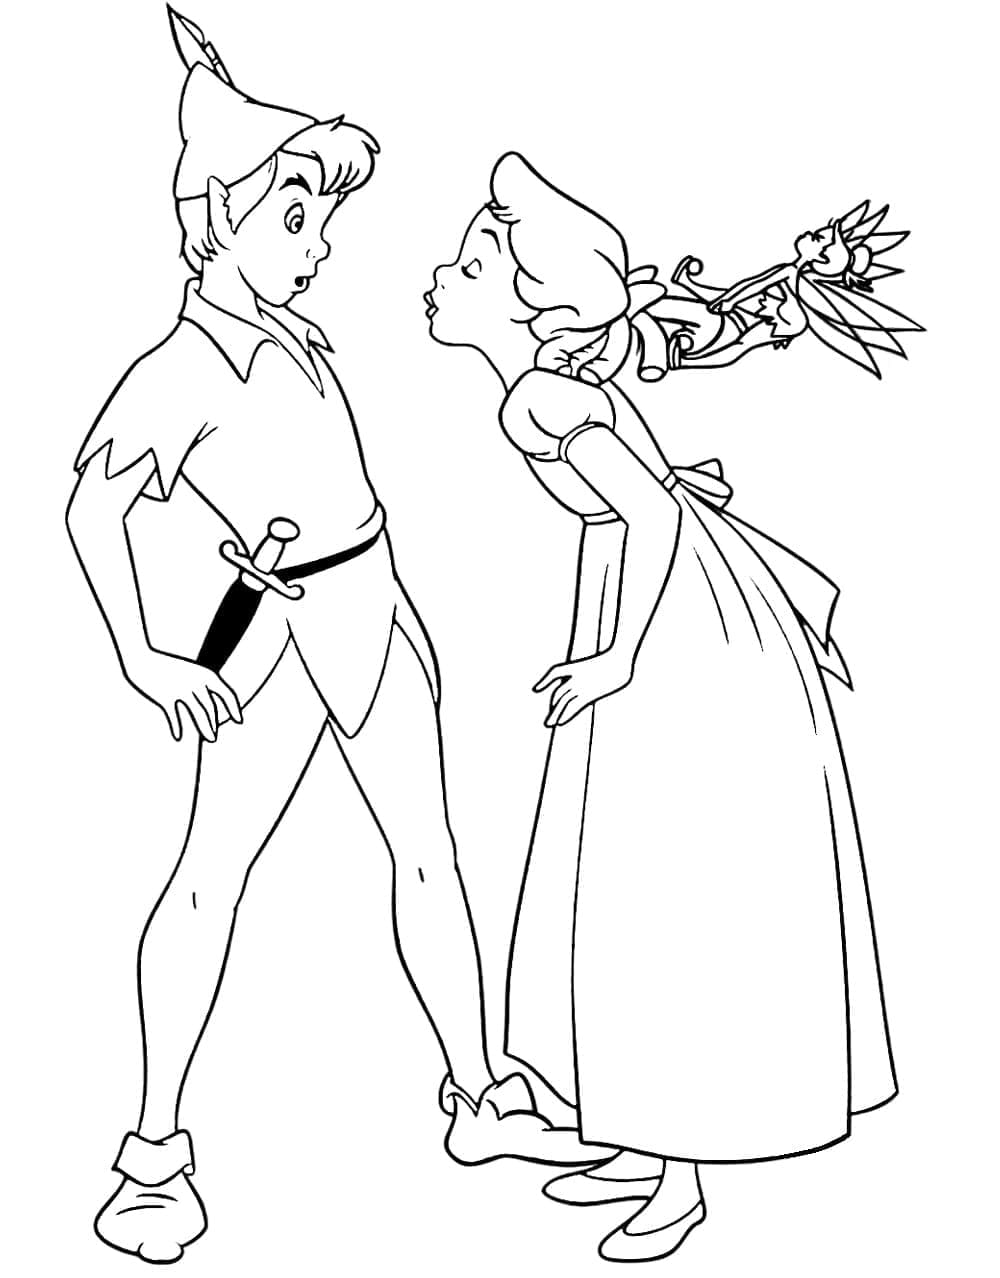 Peter pan wendy and tinker bell coloring page